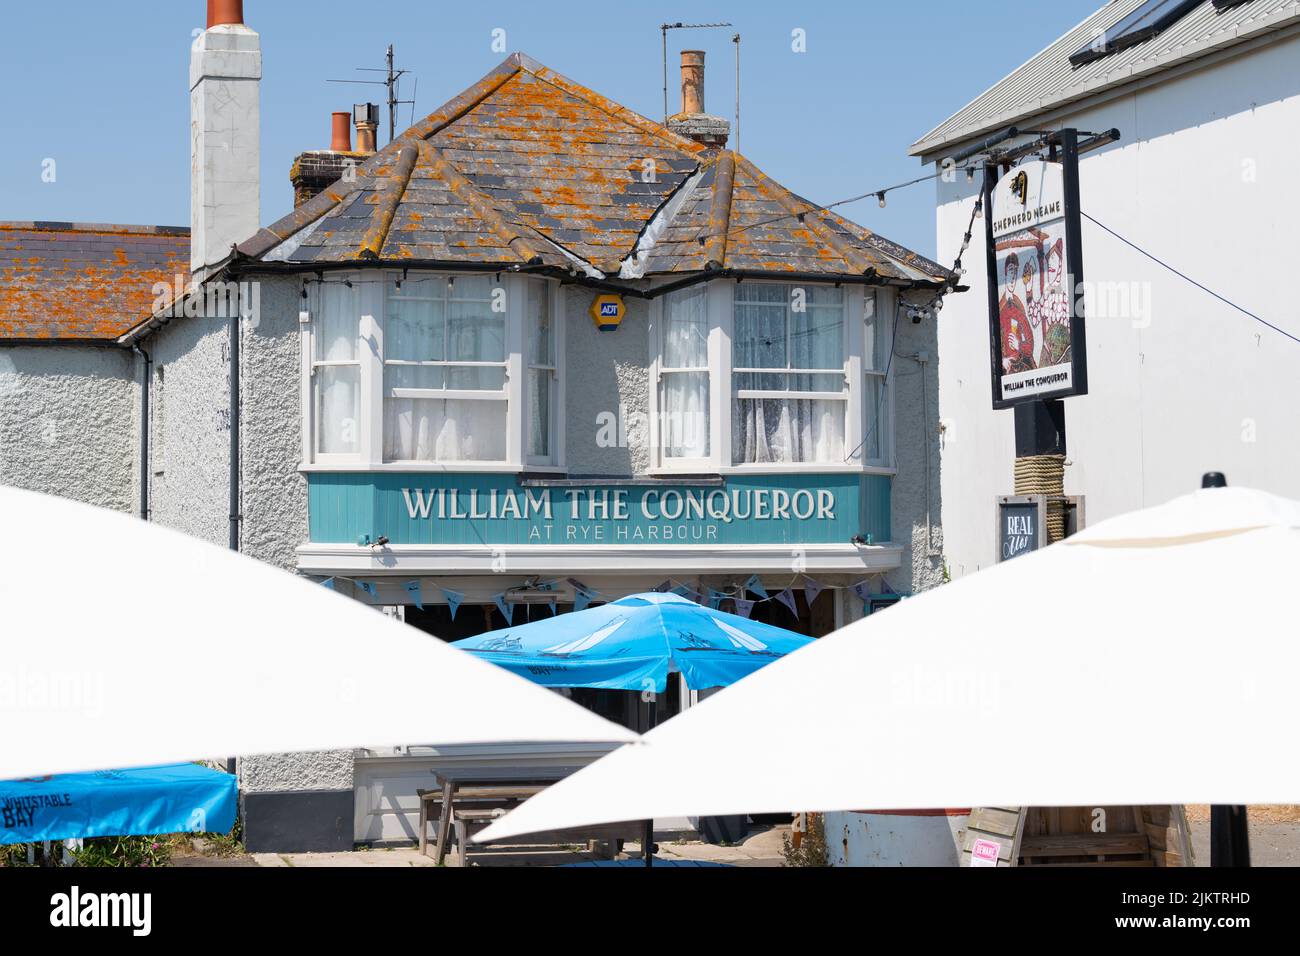 William The Conqueror at Rye Harbour - pub restaurant - Rye Harbour, Rye, East Sussex, England, UK Stock Photo